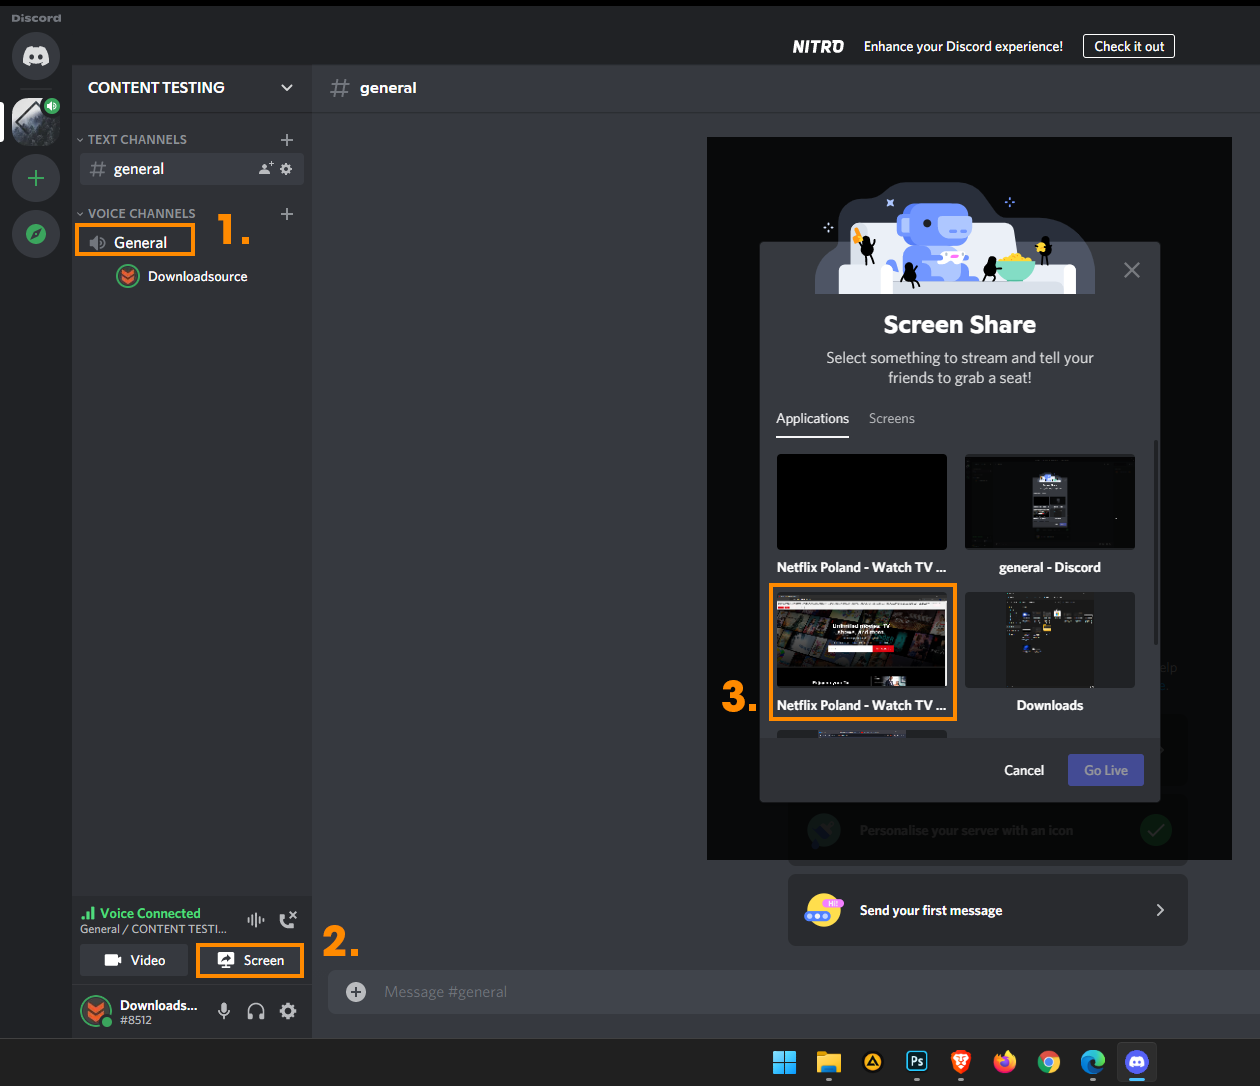 Fix black screen when streaming content over discord